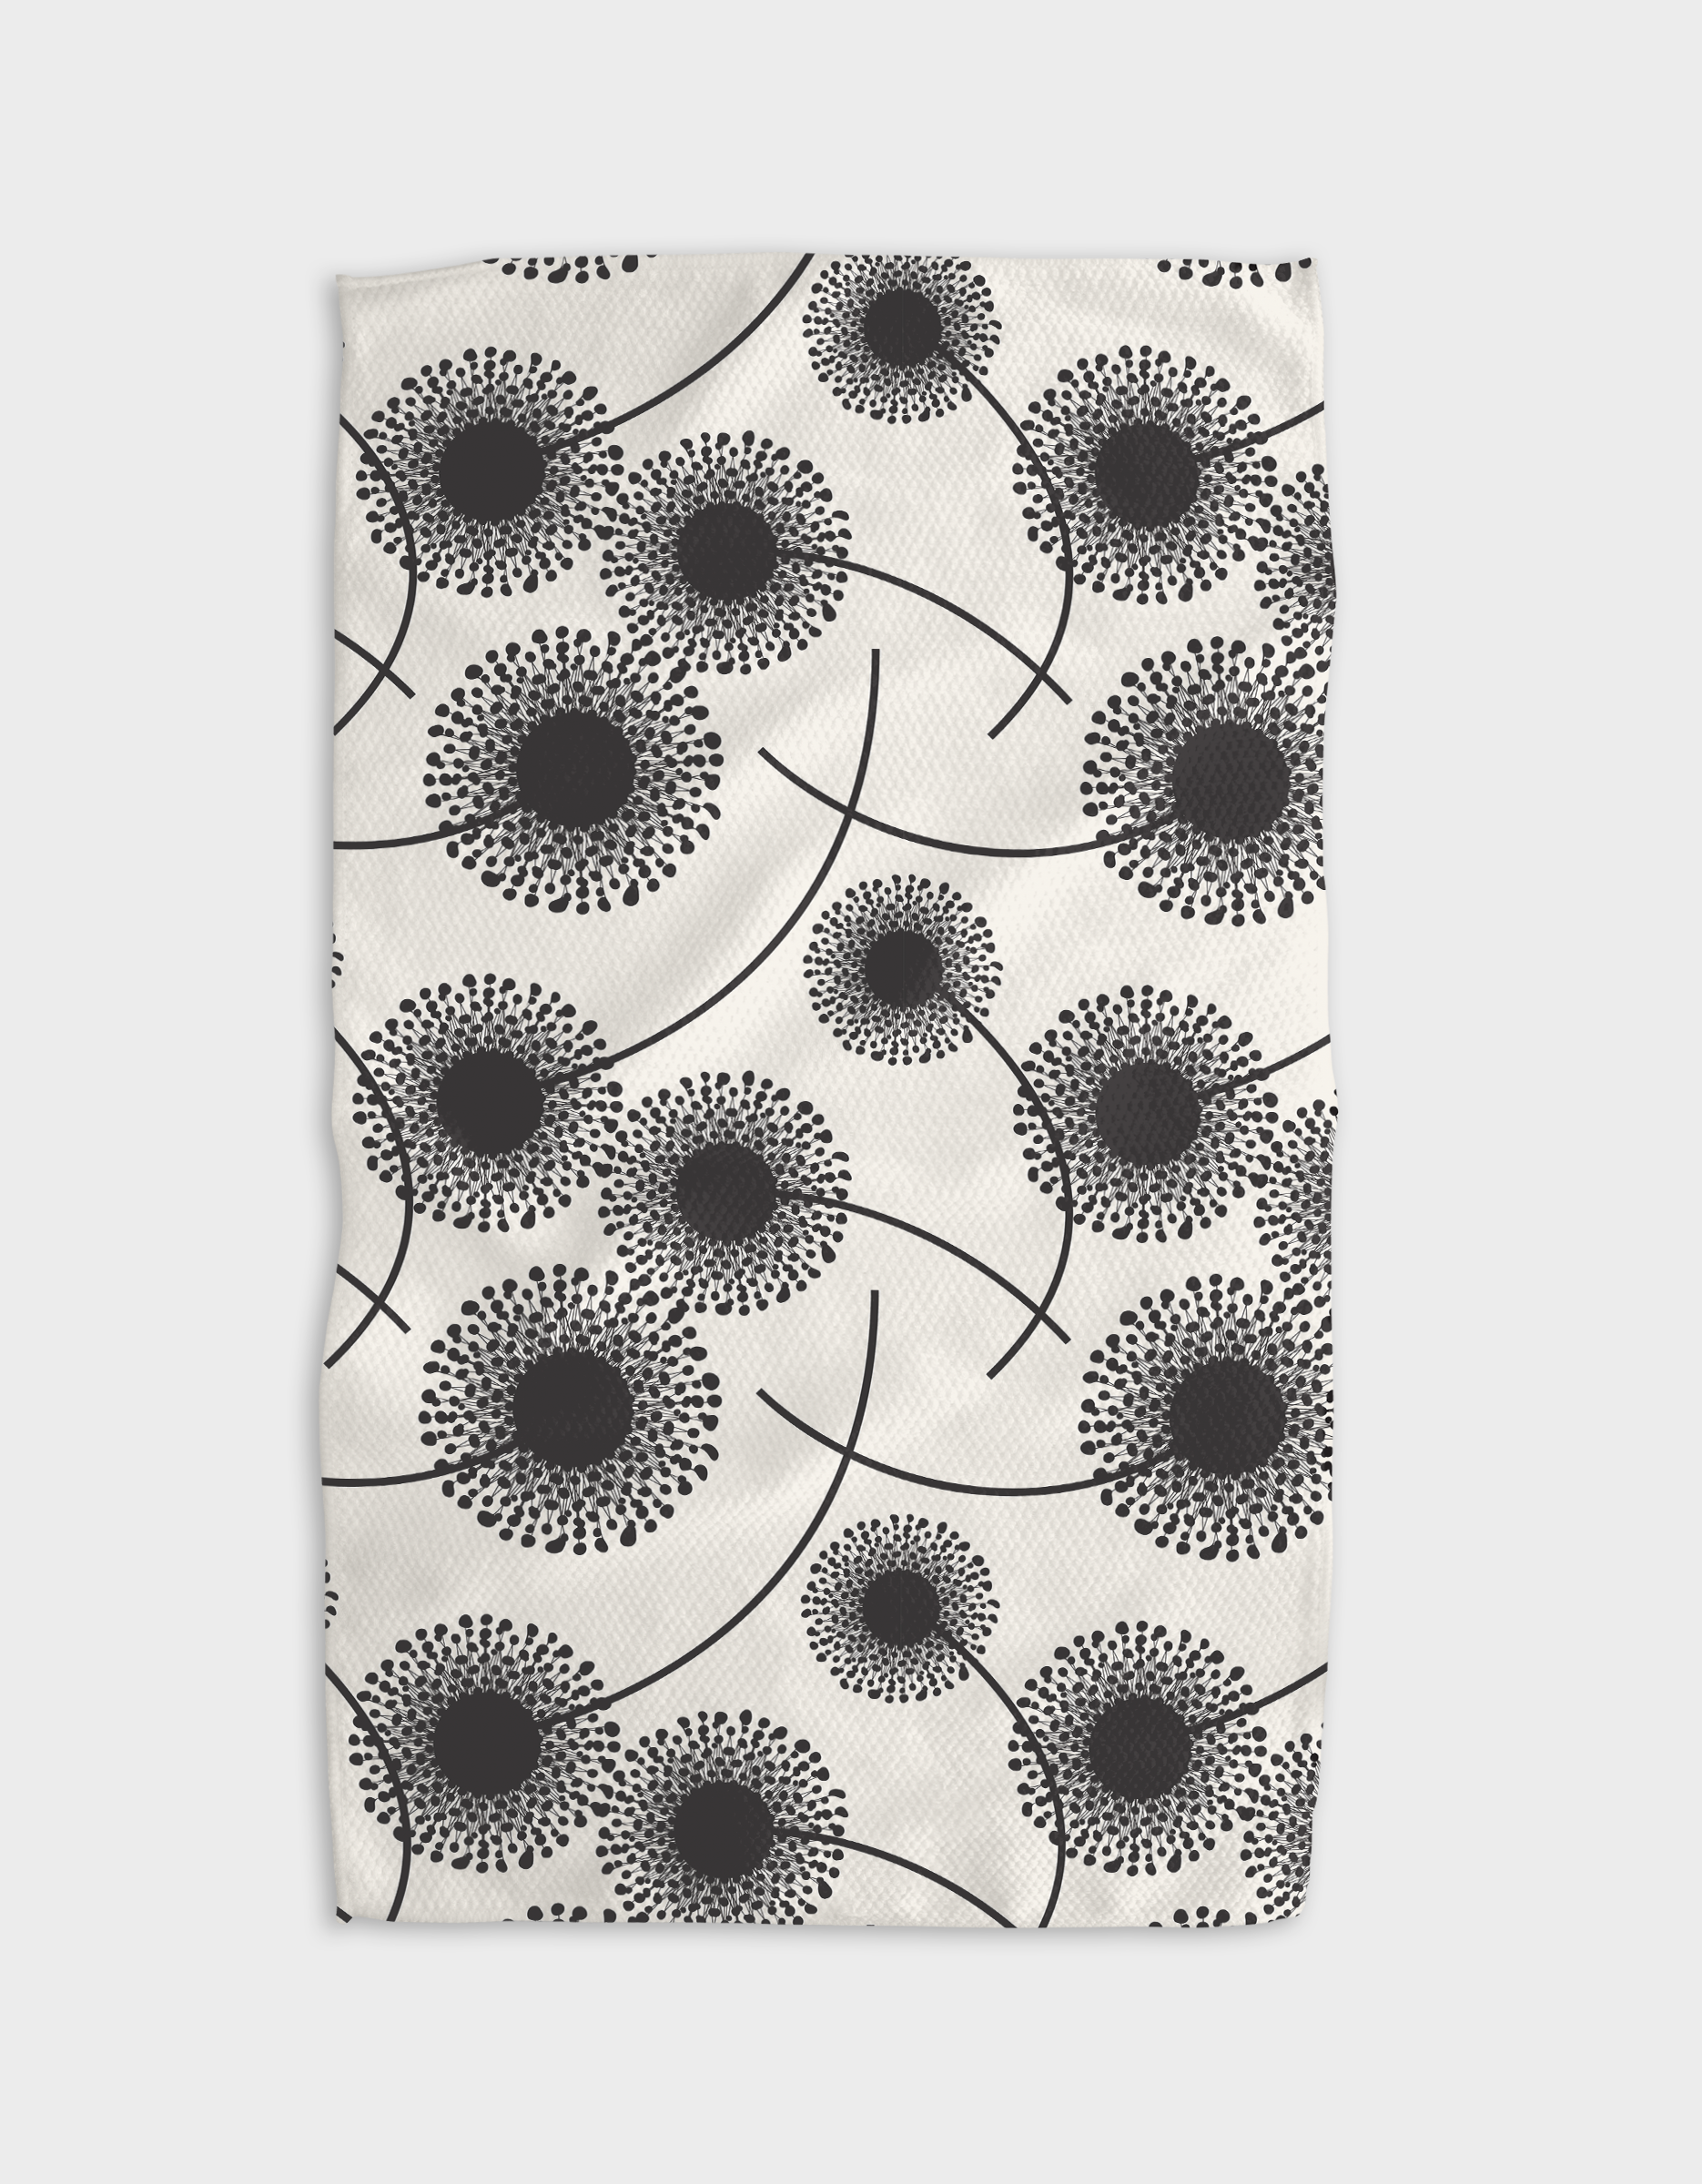 Fully Bloomed Tea Towel by Geometry. Tea Towel has black flowers on a white background.